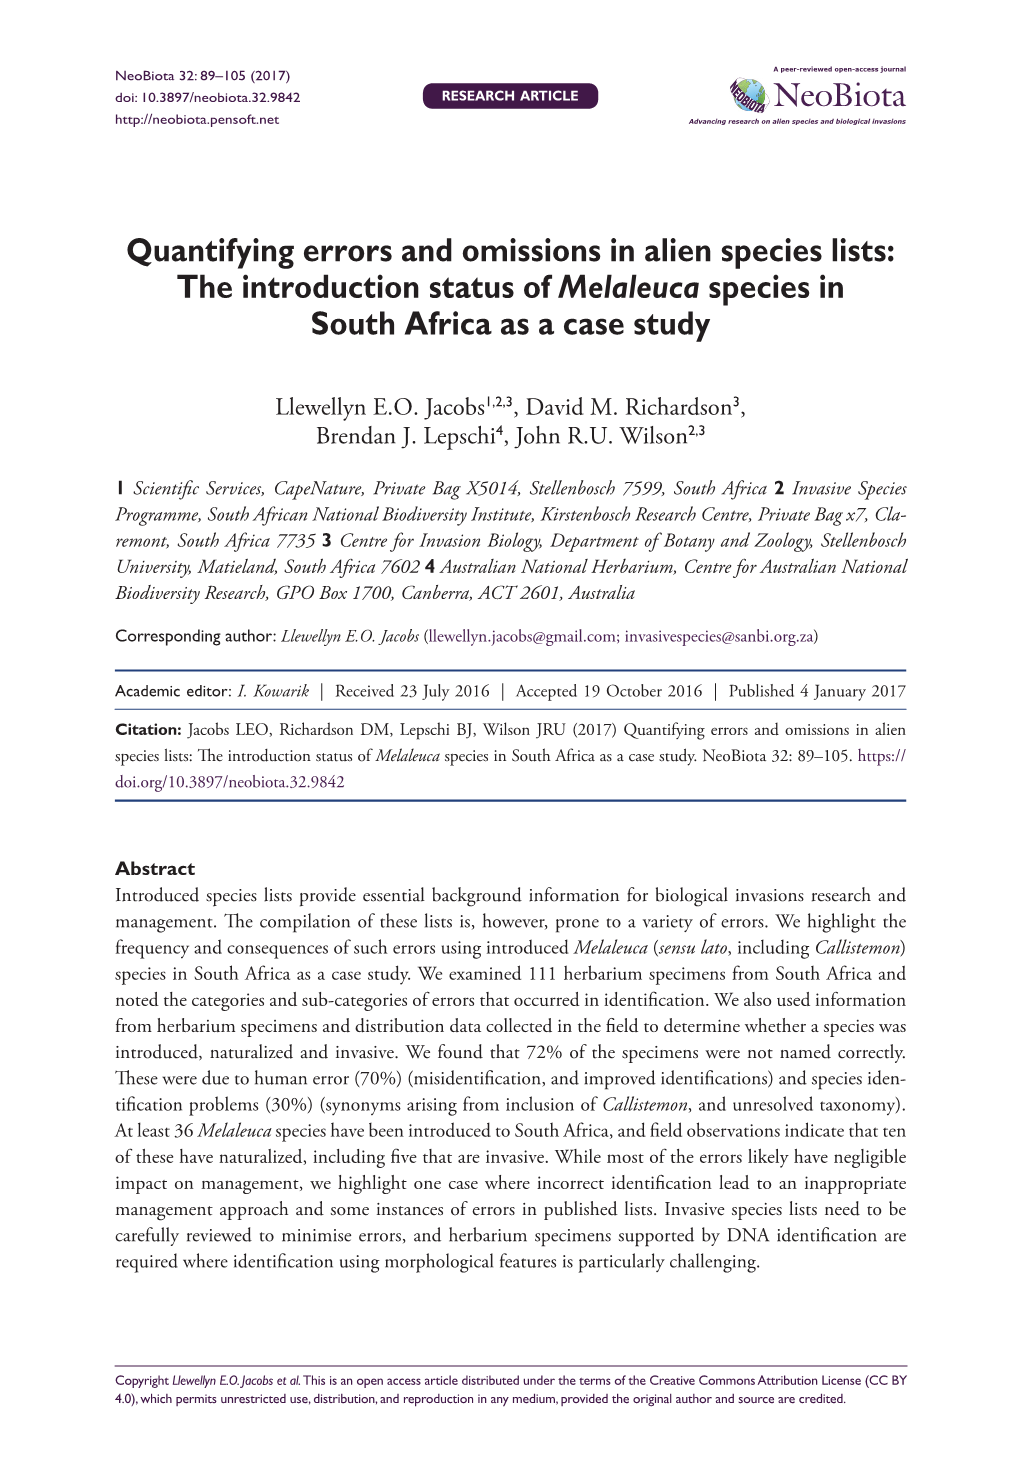 ﻿Quantifying Errors and Omissions in Alien Species Lists: the Introduction Status of Melaleuca Species in South Africa As a Ca